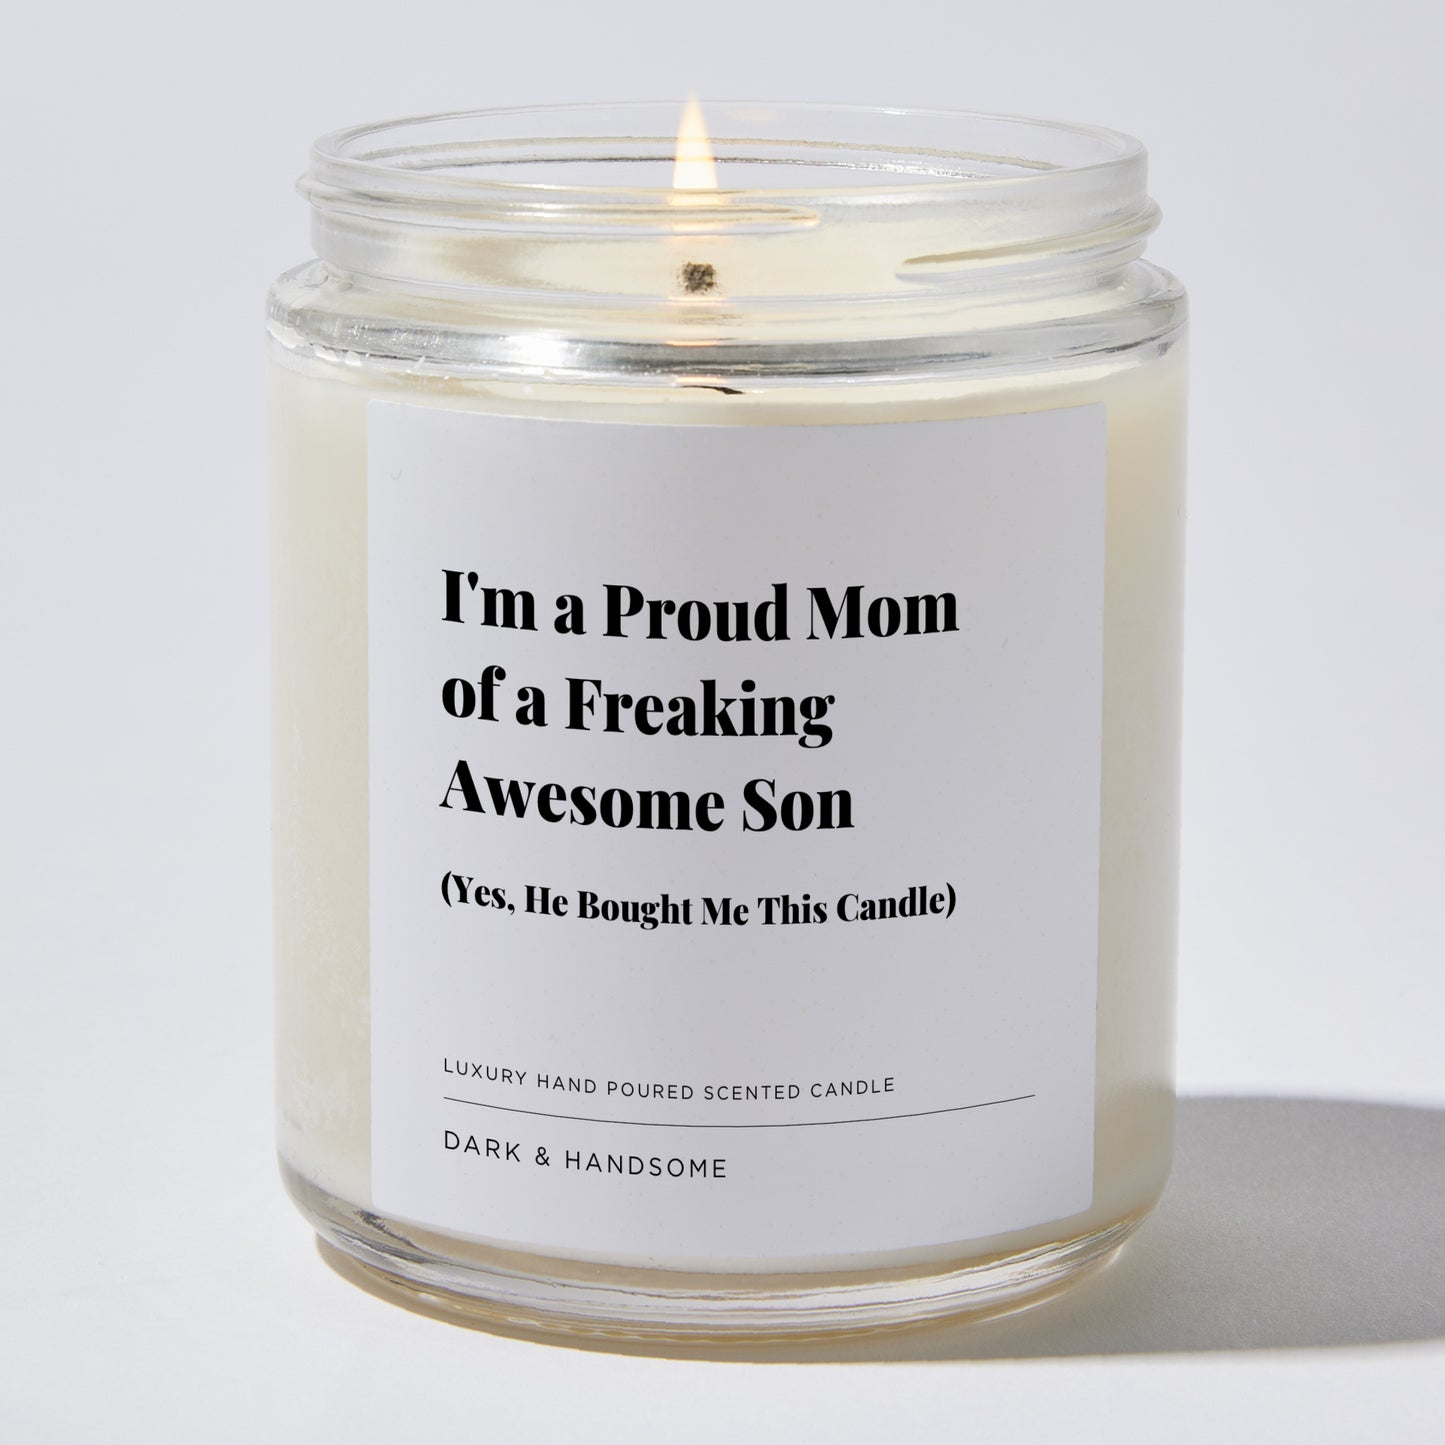 Gift for Mom - I'm a Proud Mom of a Freaking Awesome Son (yes, he bought me this candle) - Candle